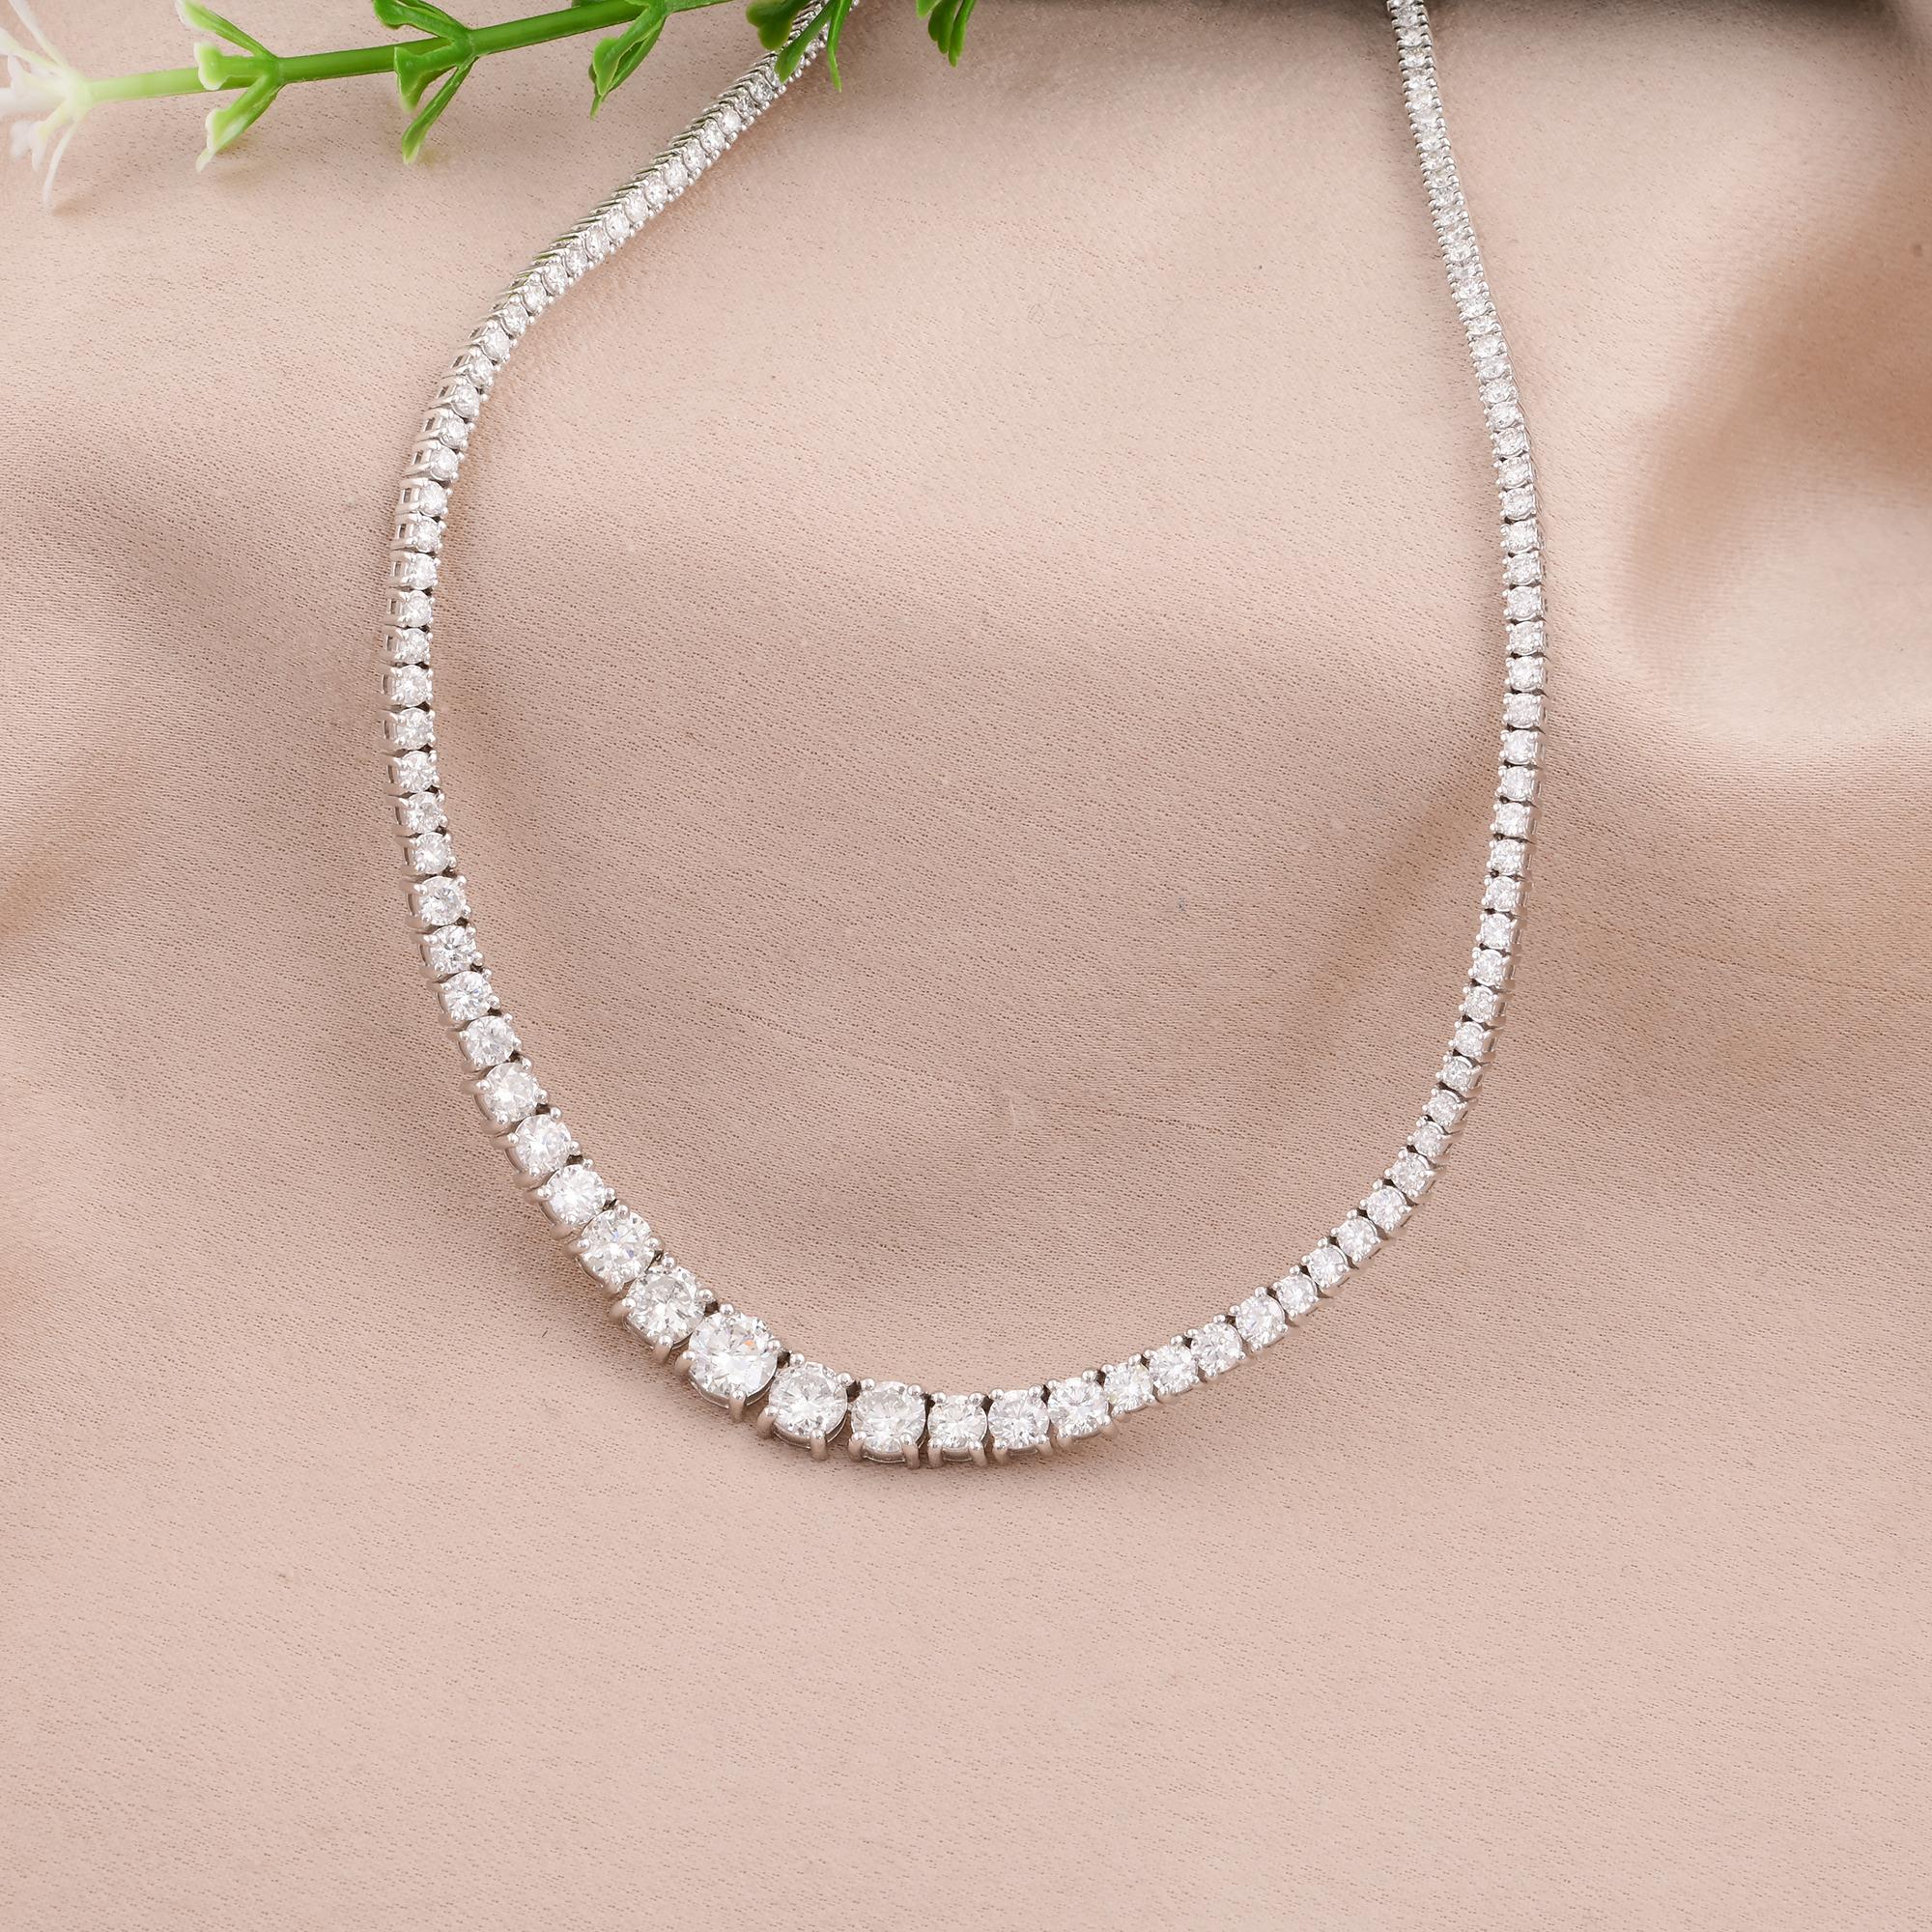 Round Cut Natural 5.23 Carat Diamond Necklace 18 Karat White Solid Gold Handmade Jewelry For Sale